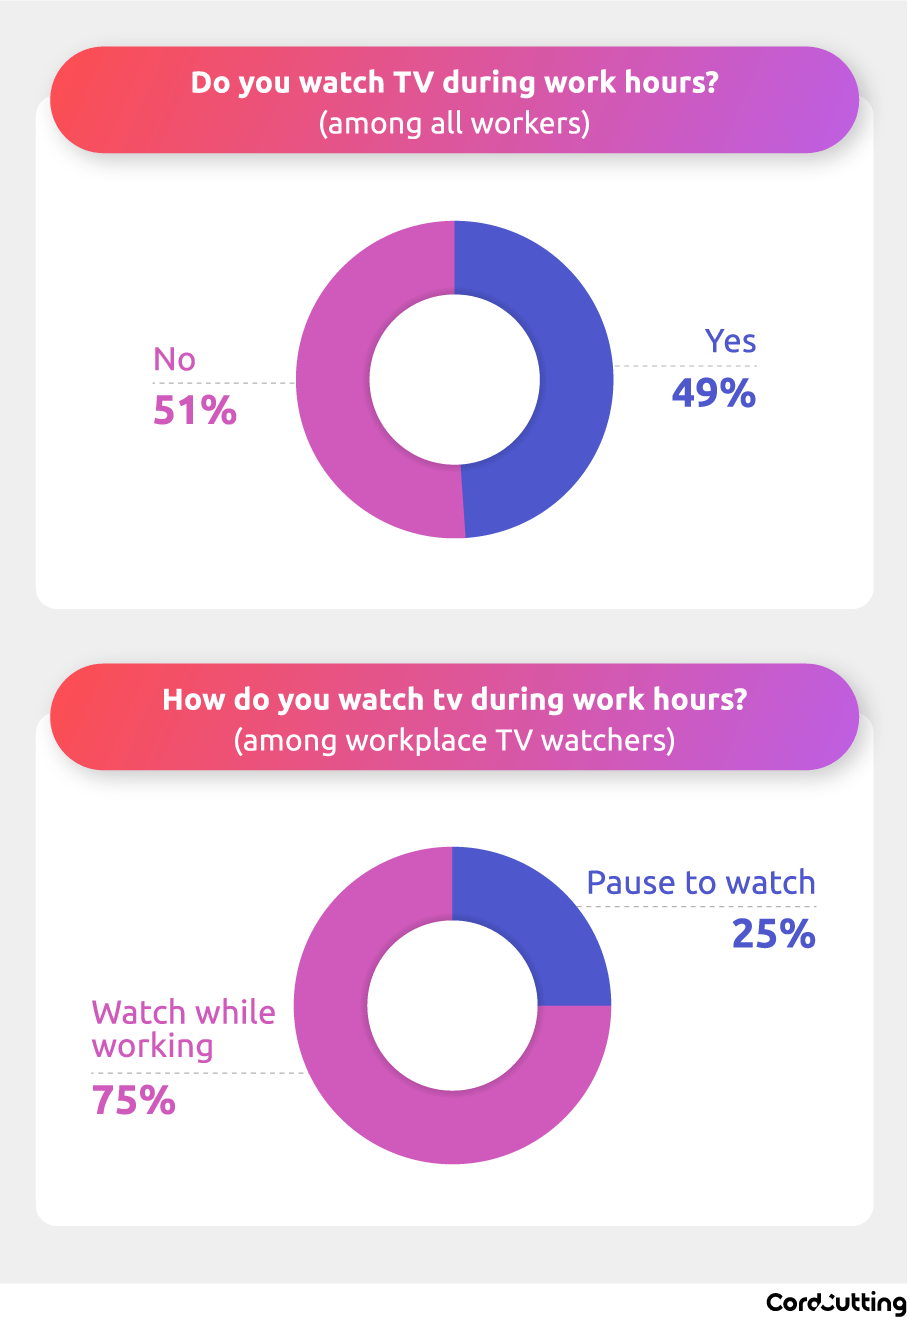 workers who watch TV during work hours